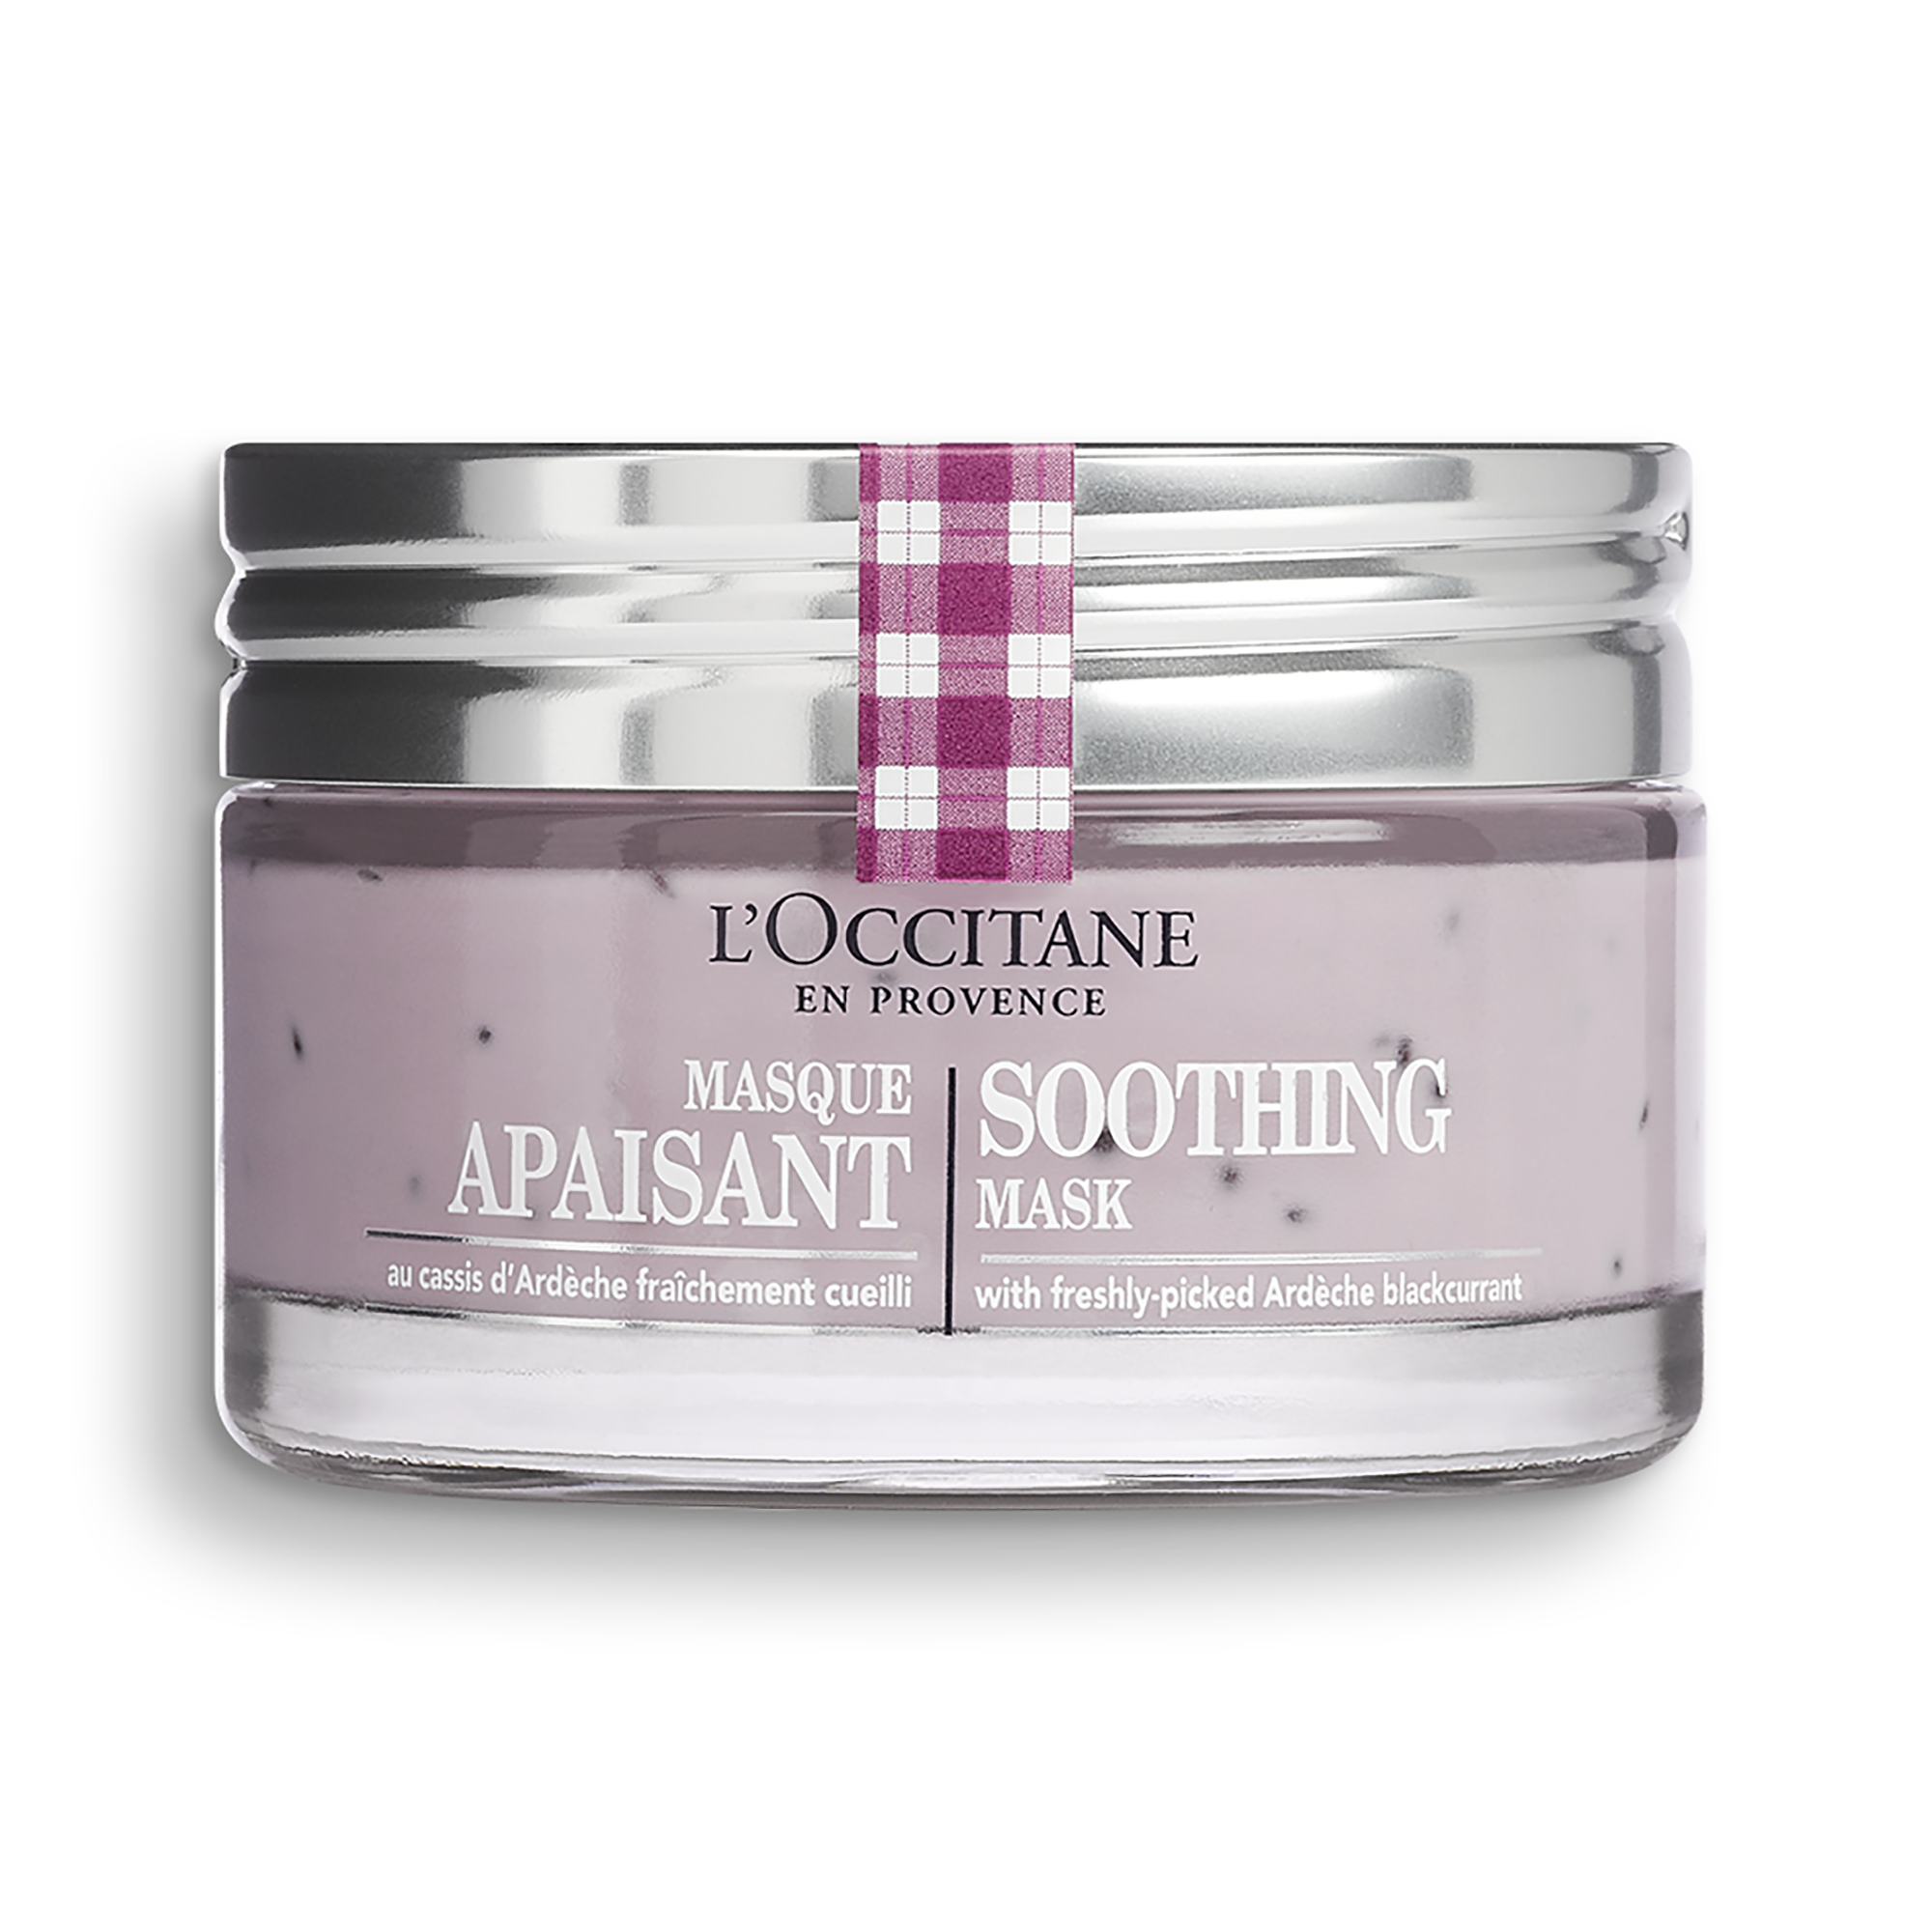 L'Occitane Soothing Mask / 2.6OZ